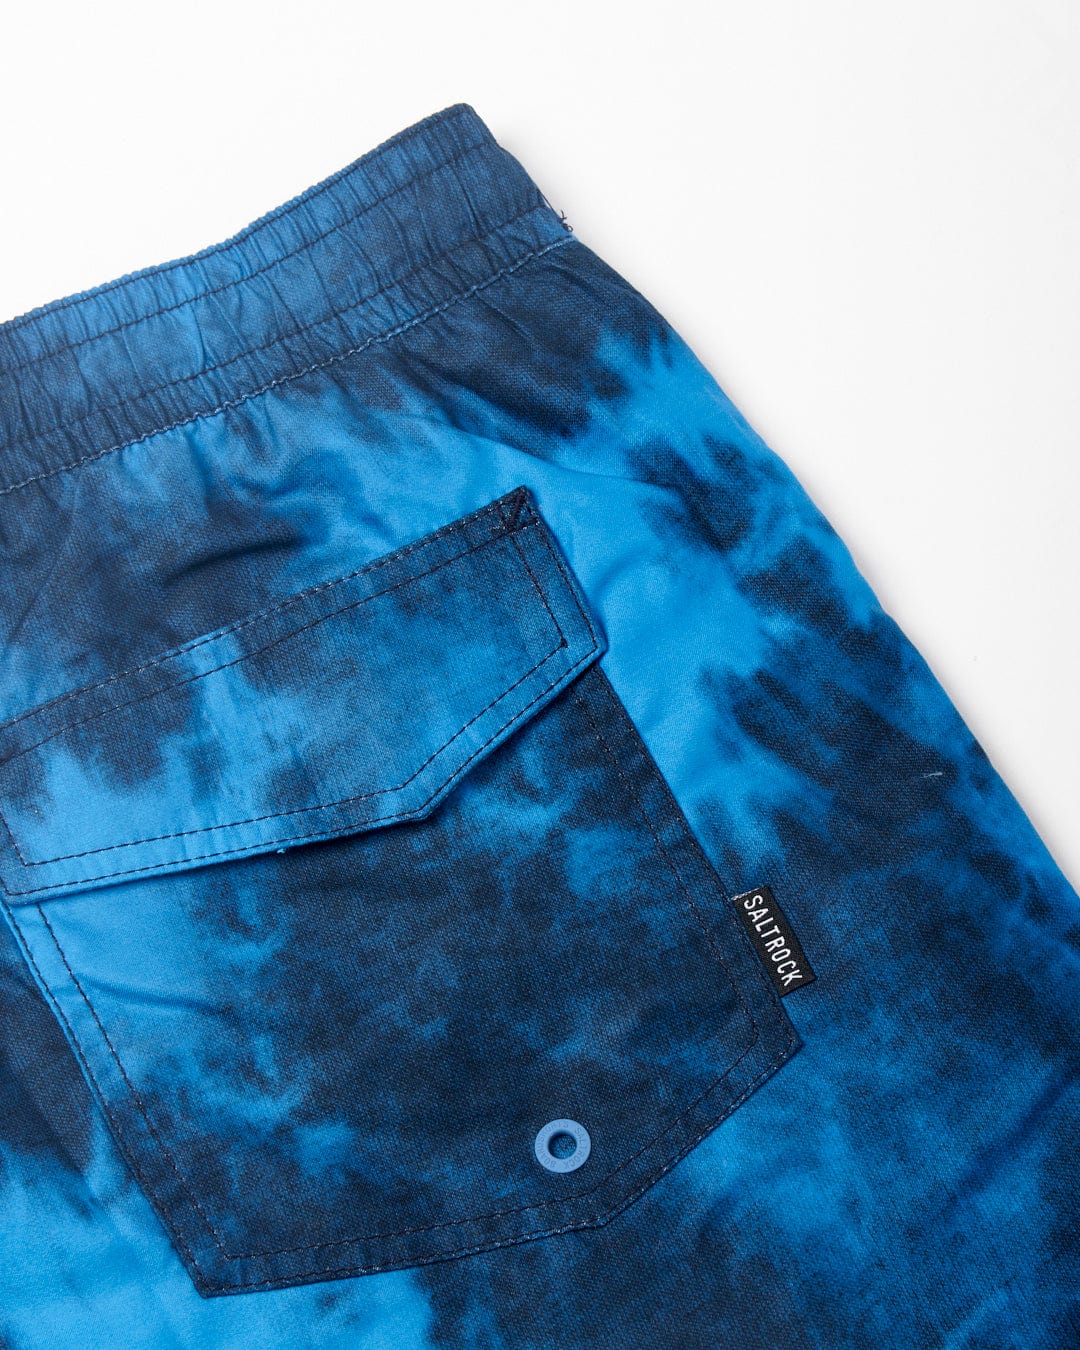 Blue Lee - Mens Tie Dye Swimshorts with a back pocket and a visible brand tag reading "Saltrock" on a white background.